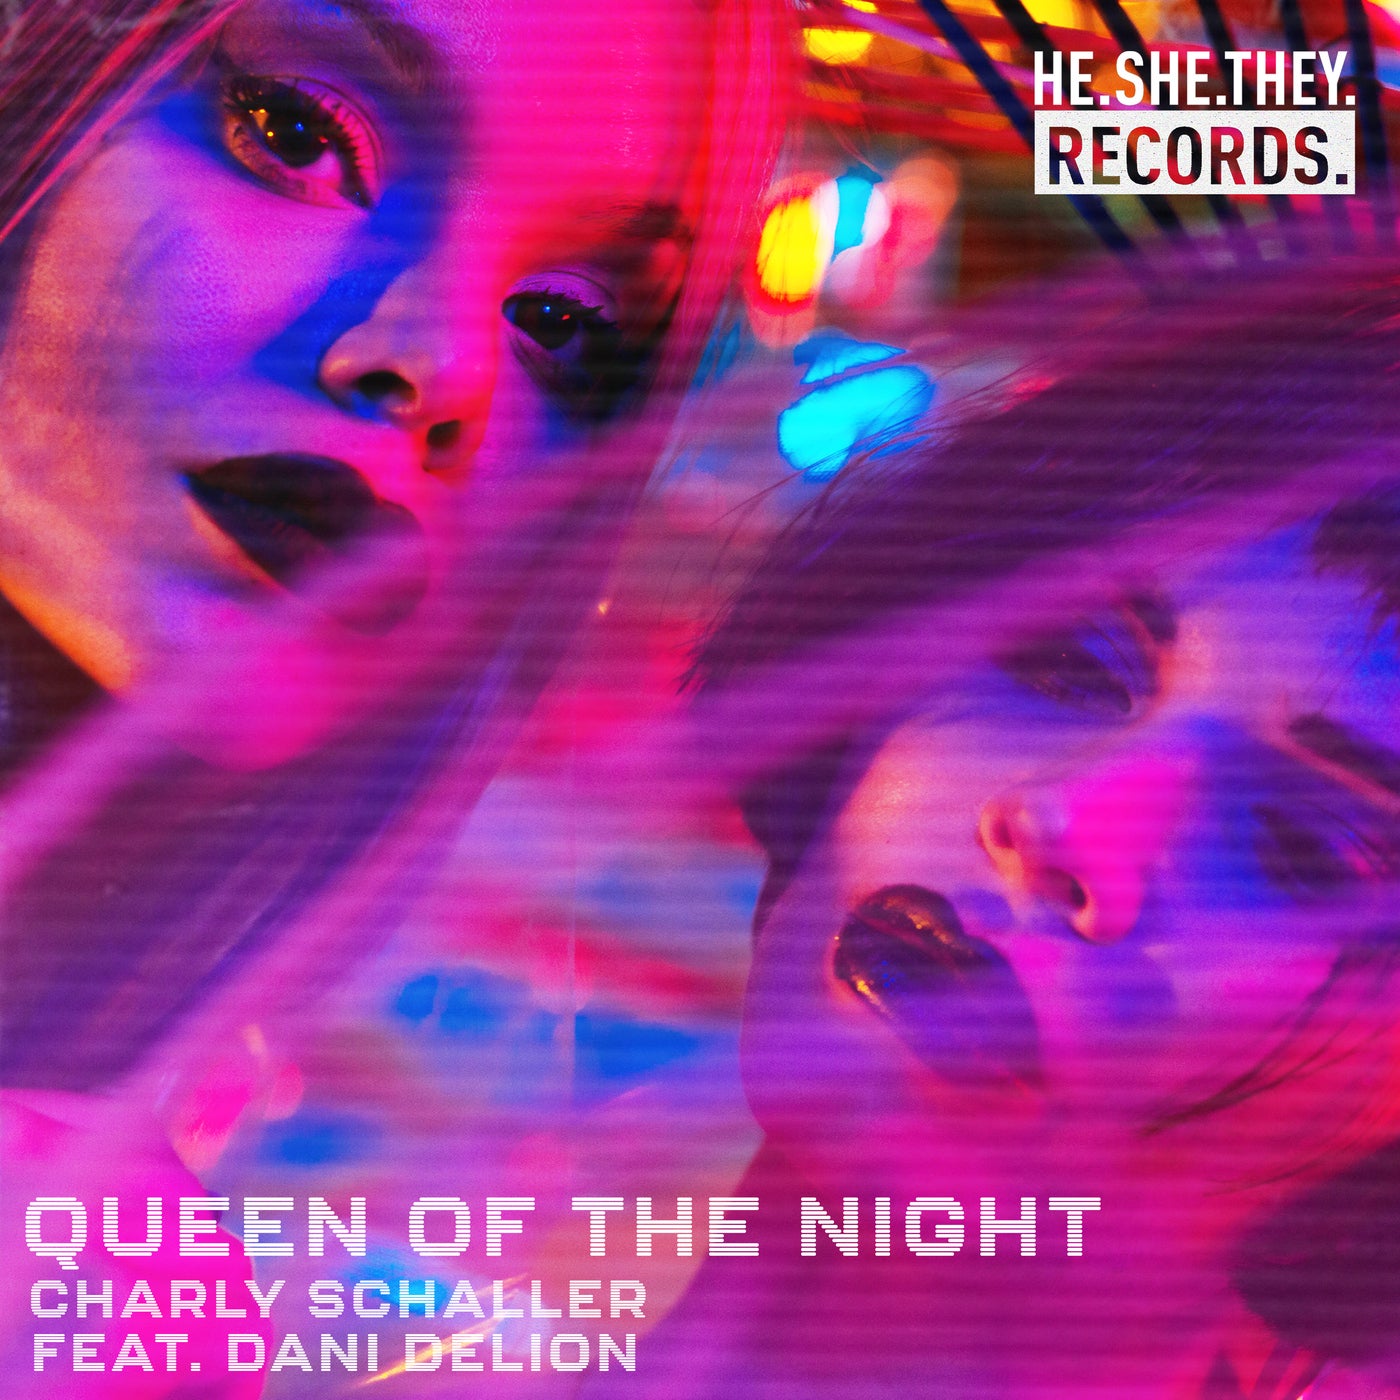 Charly Schaller – Queen Of The Night (feat. Dani DeLion) [Radio Slave Remix] [190296764080]